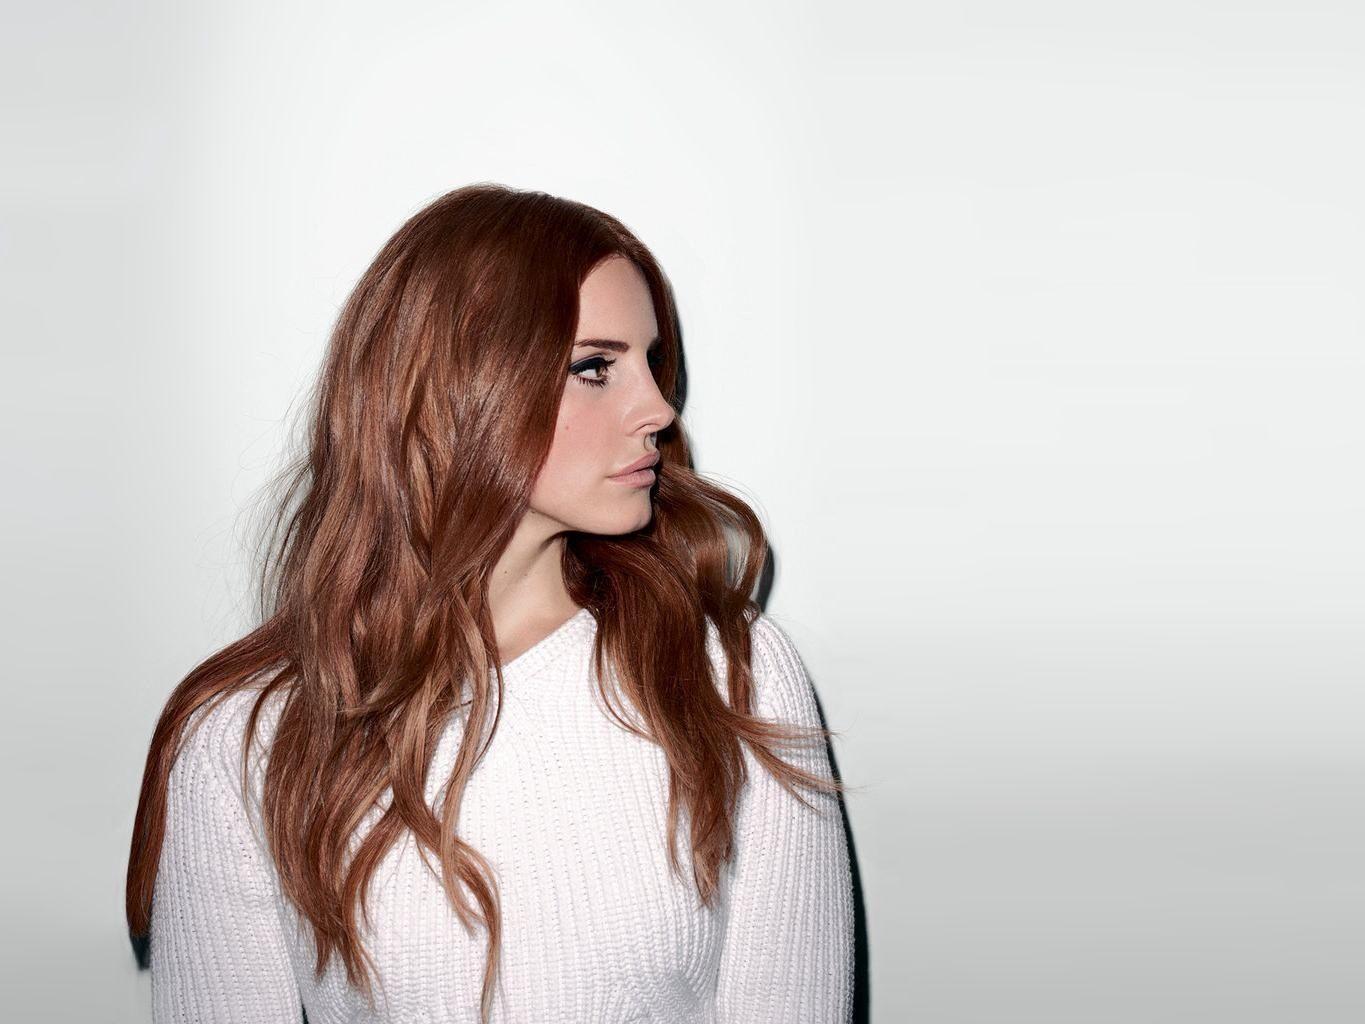 A woman with long red hair and wearing white - Lana Del Rey